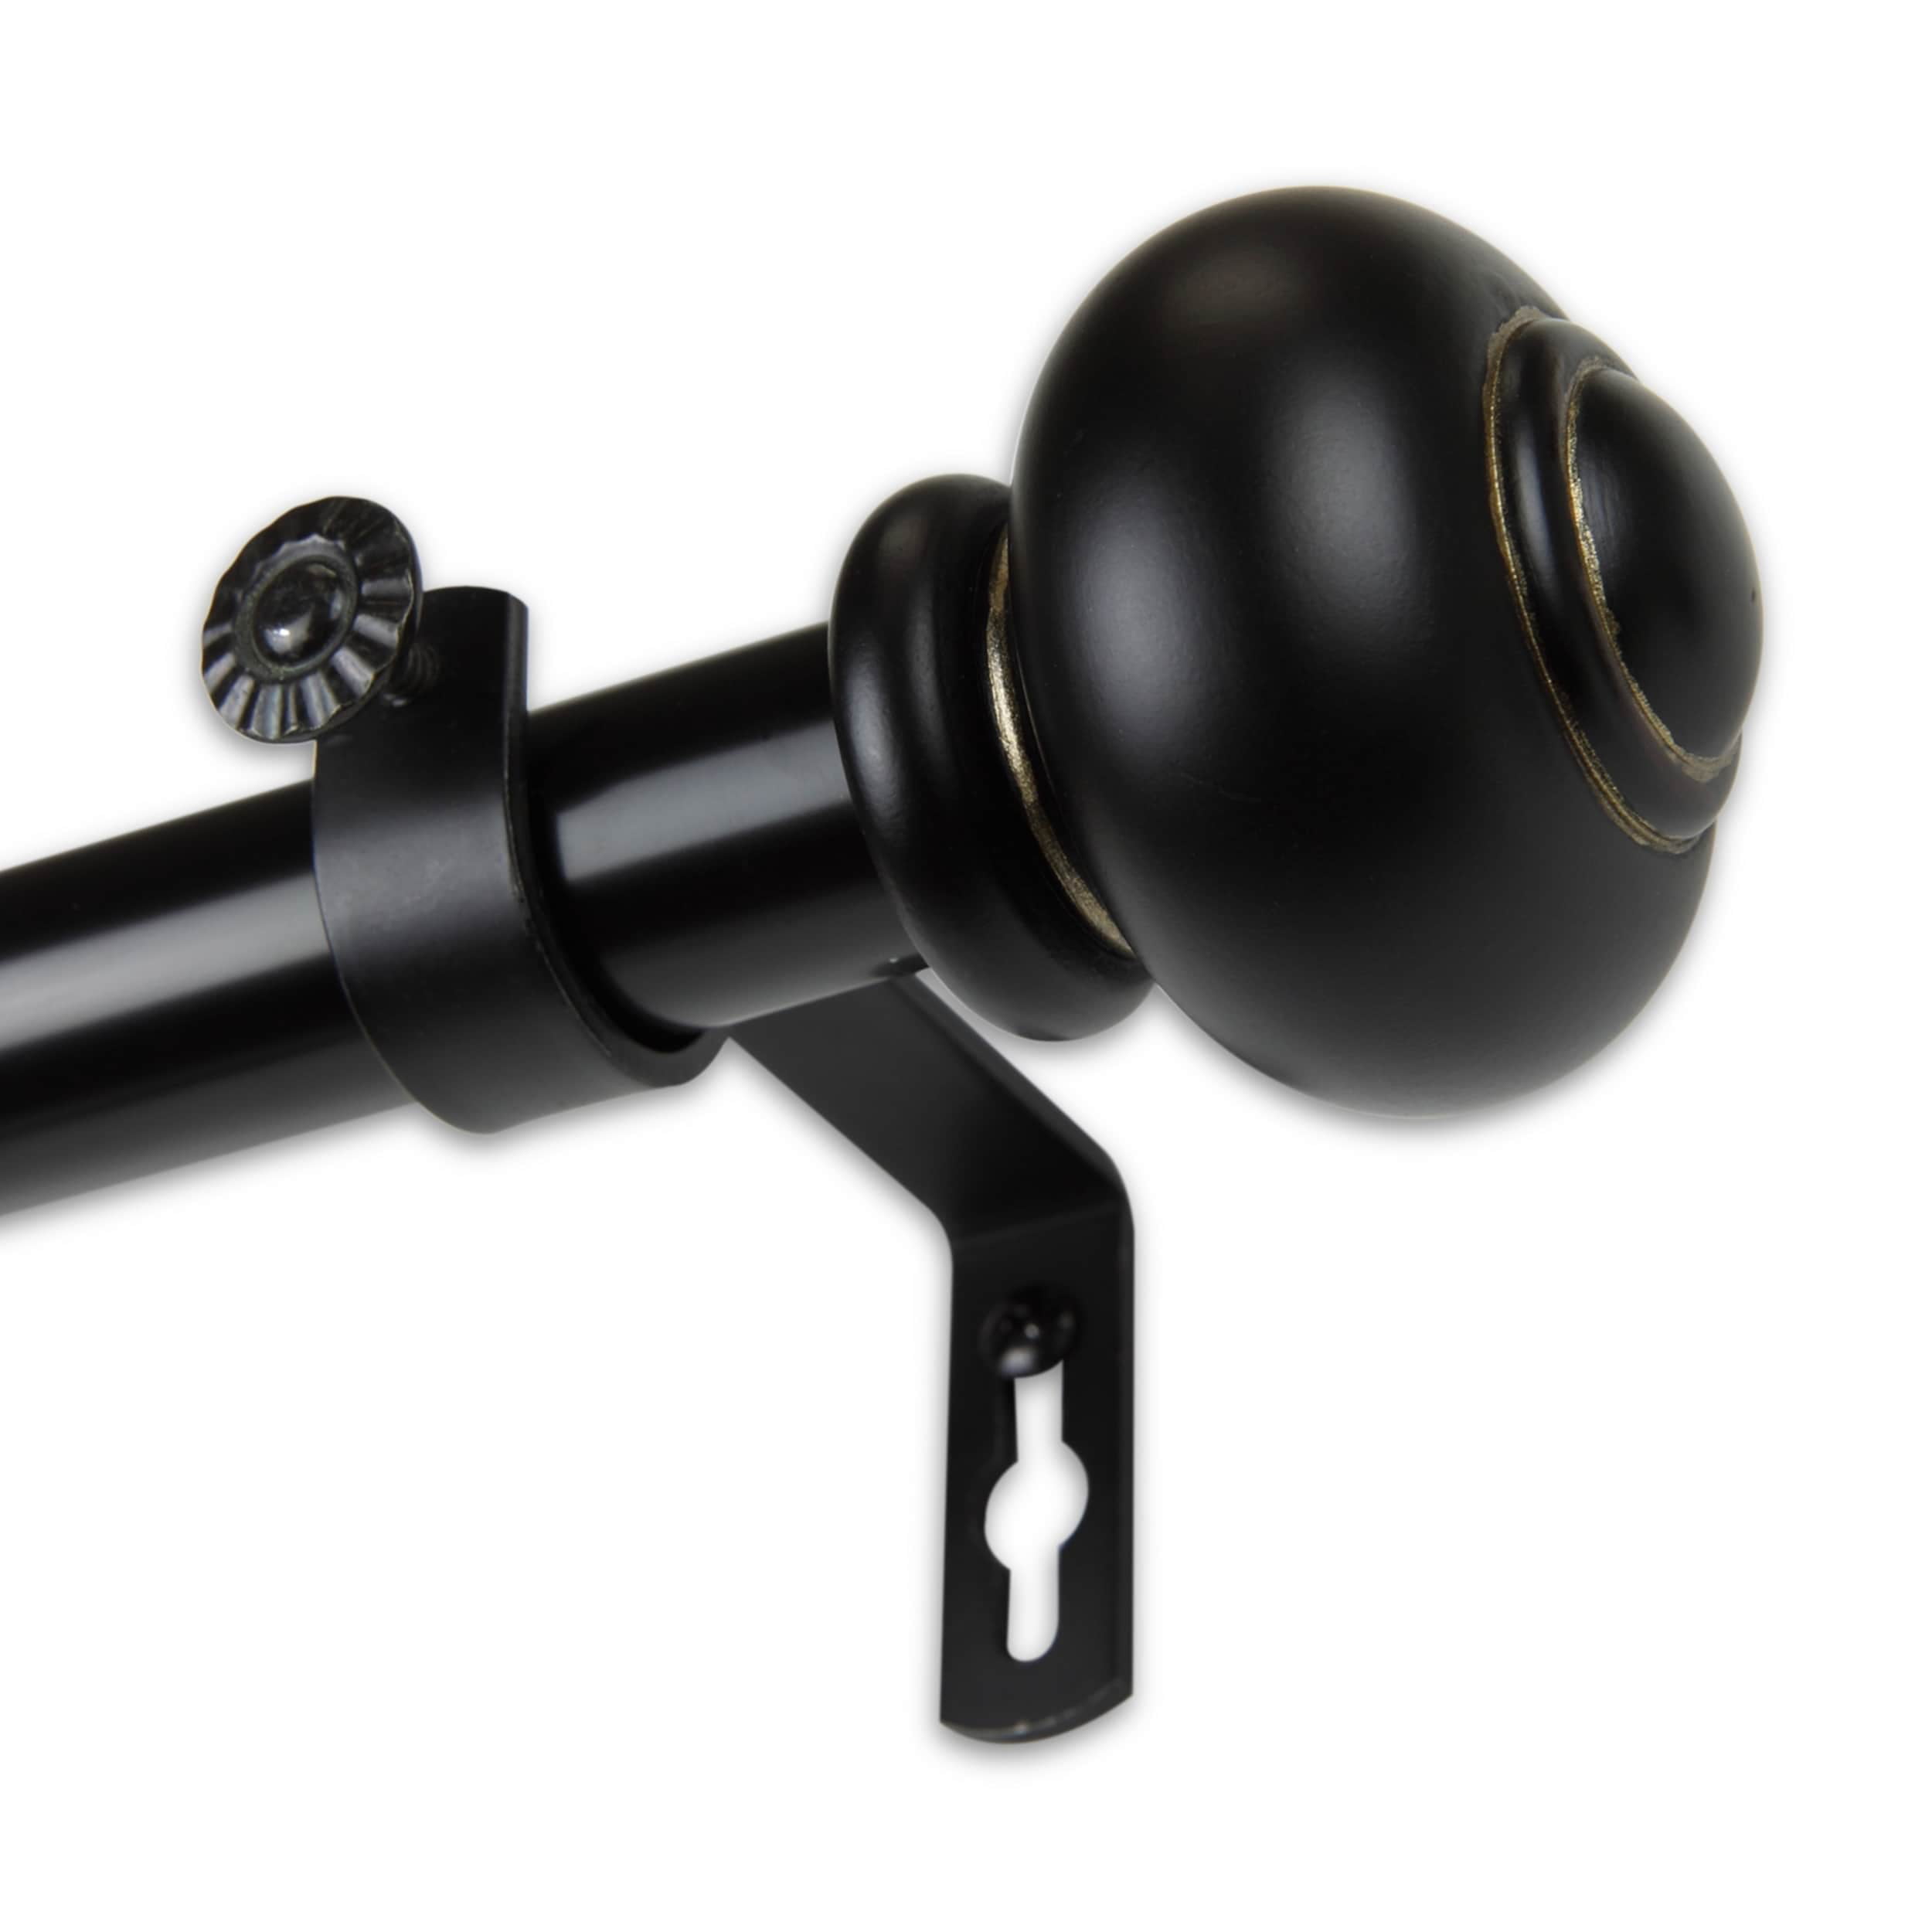 InStyleDesign Barta 1 inch Diameter Adjustable Double Curtain Rod Black 28 to 48 inches N/A